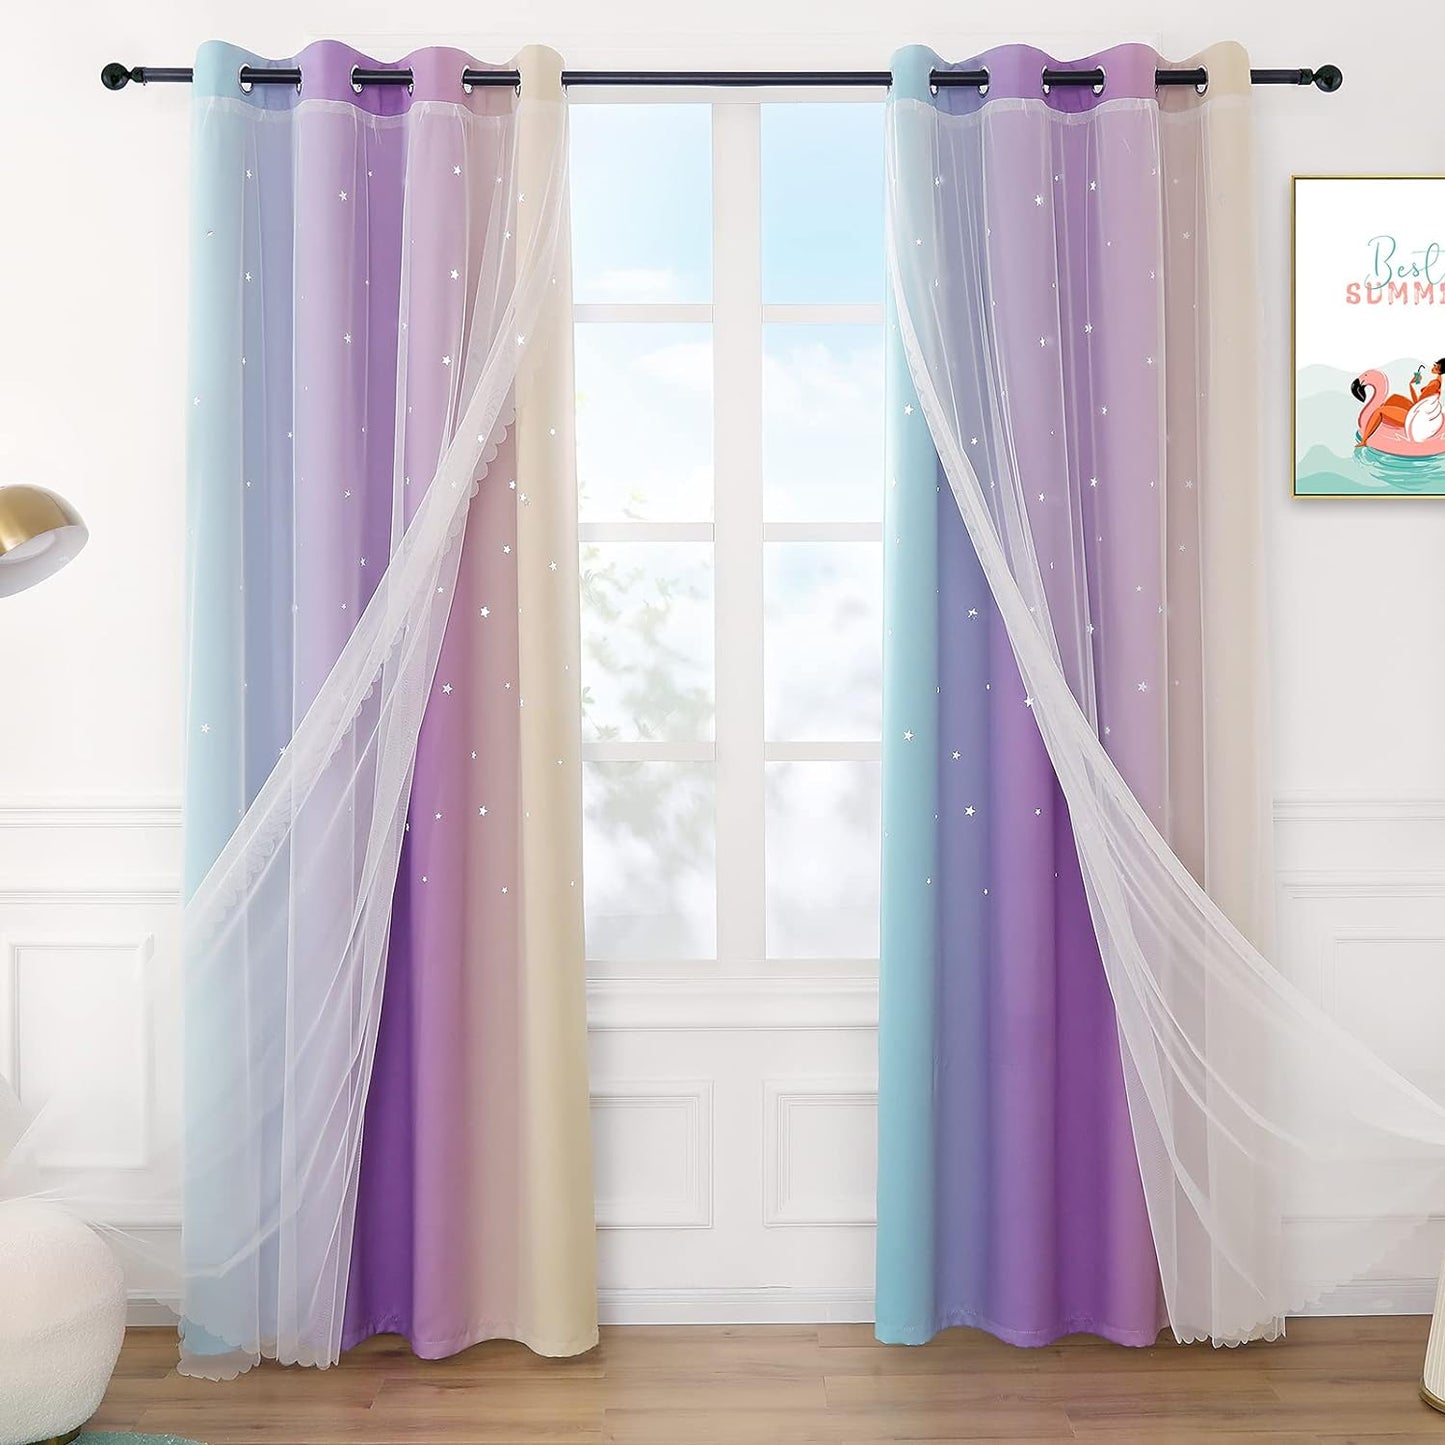 Anjee Rainbow Curtains for Girls Bedroom Double Layer Blackout Curtains Grommets Top Star Cutout Ombre Window Drapes with Sheer for Living Room 2 Panels in 52 X 84 Inch Length, Pink and Yellow  Anjee Blue/Purple/Yellow W52" X L95" 